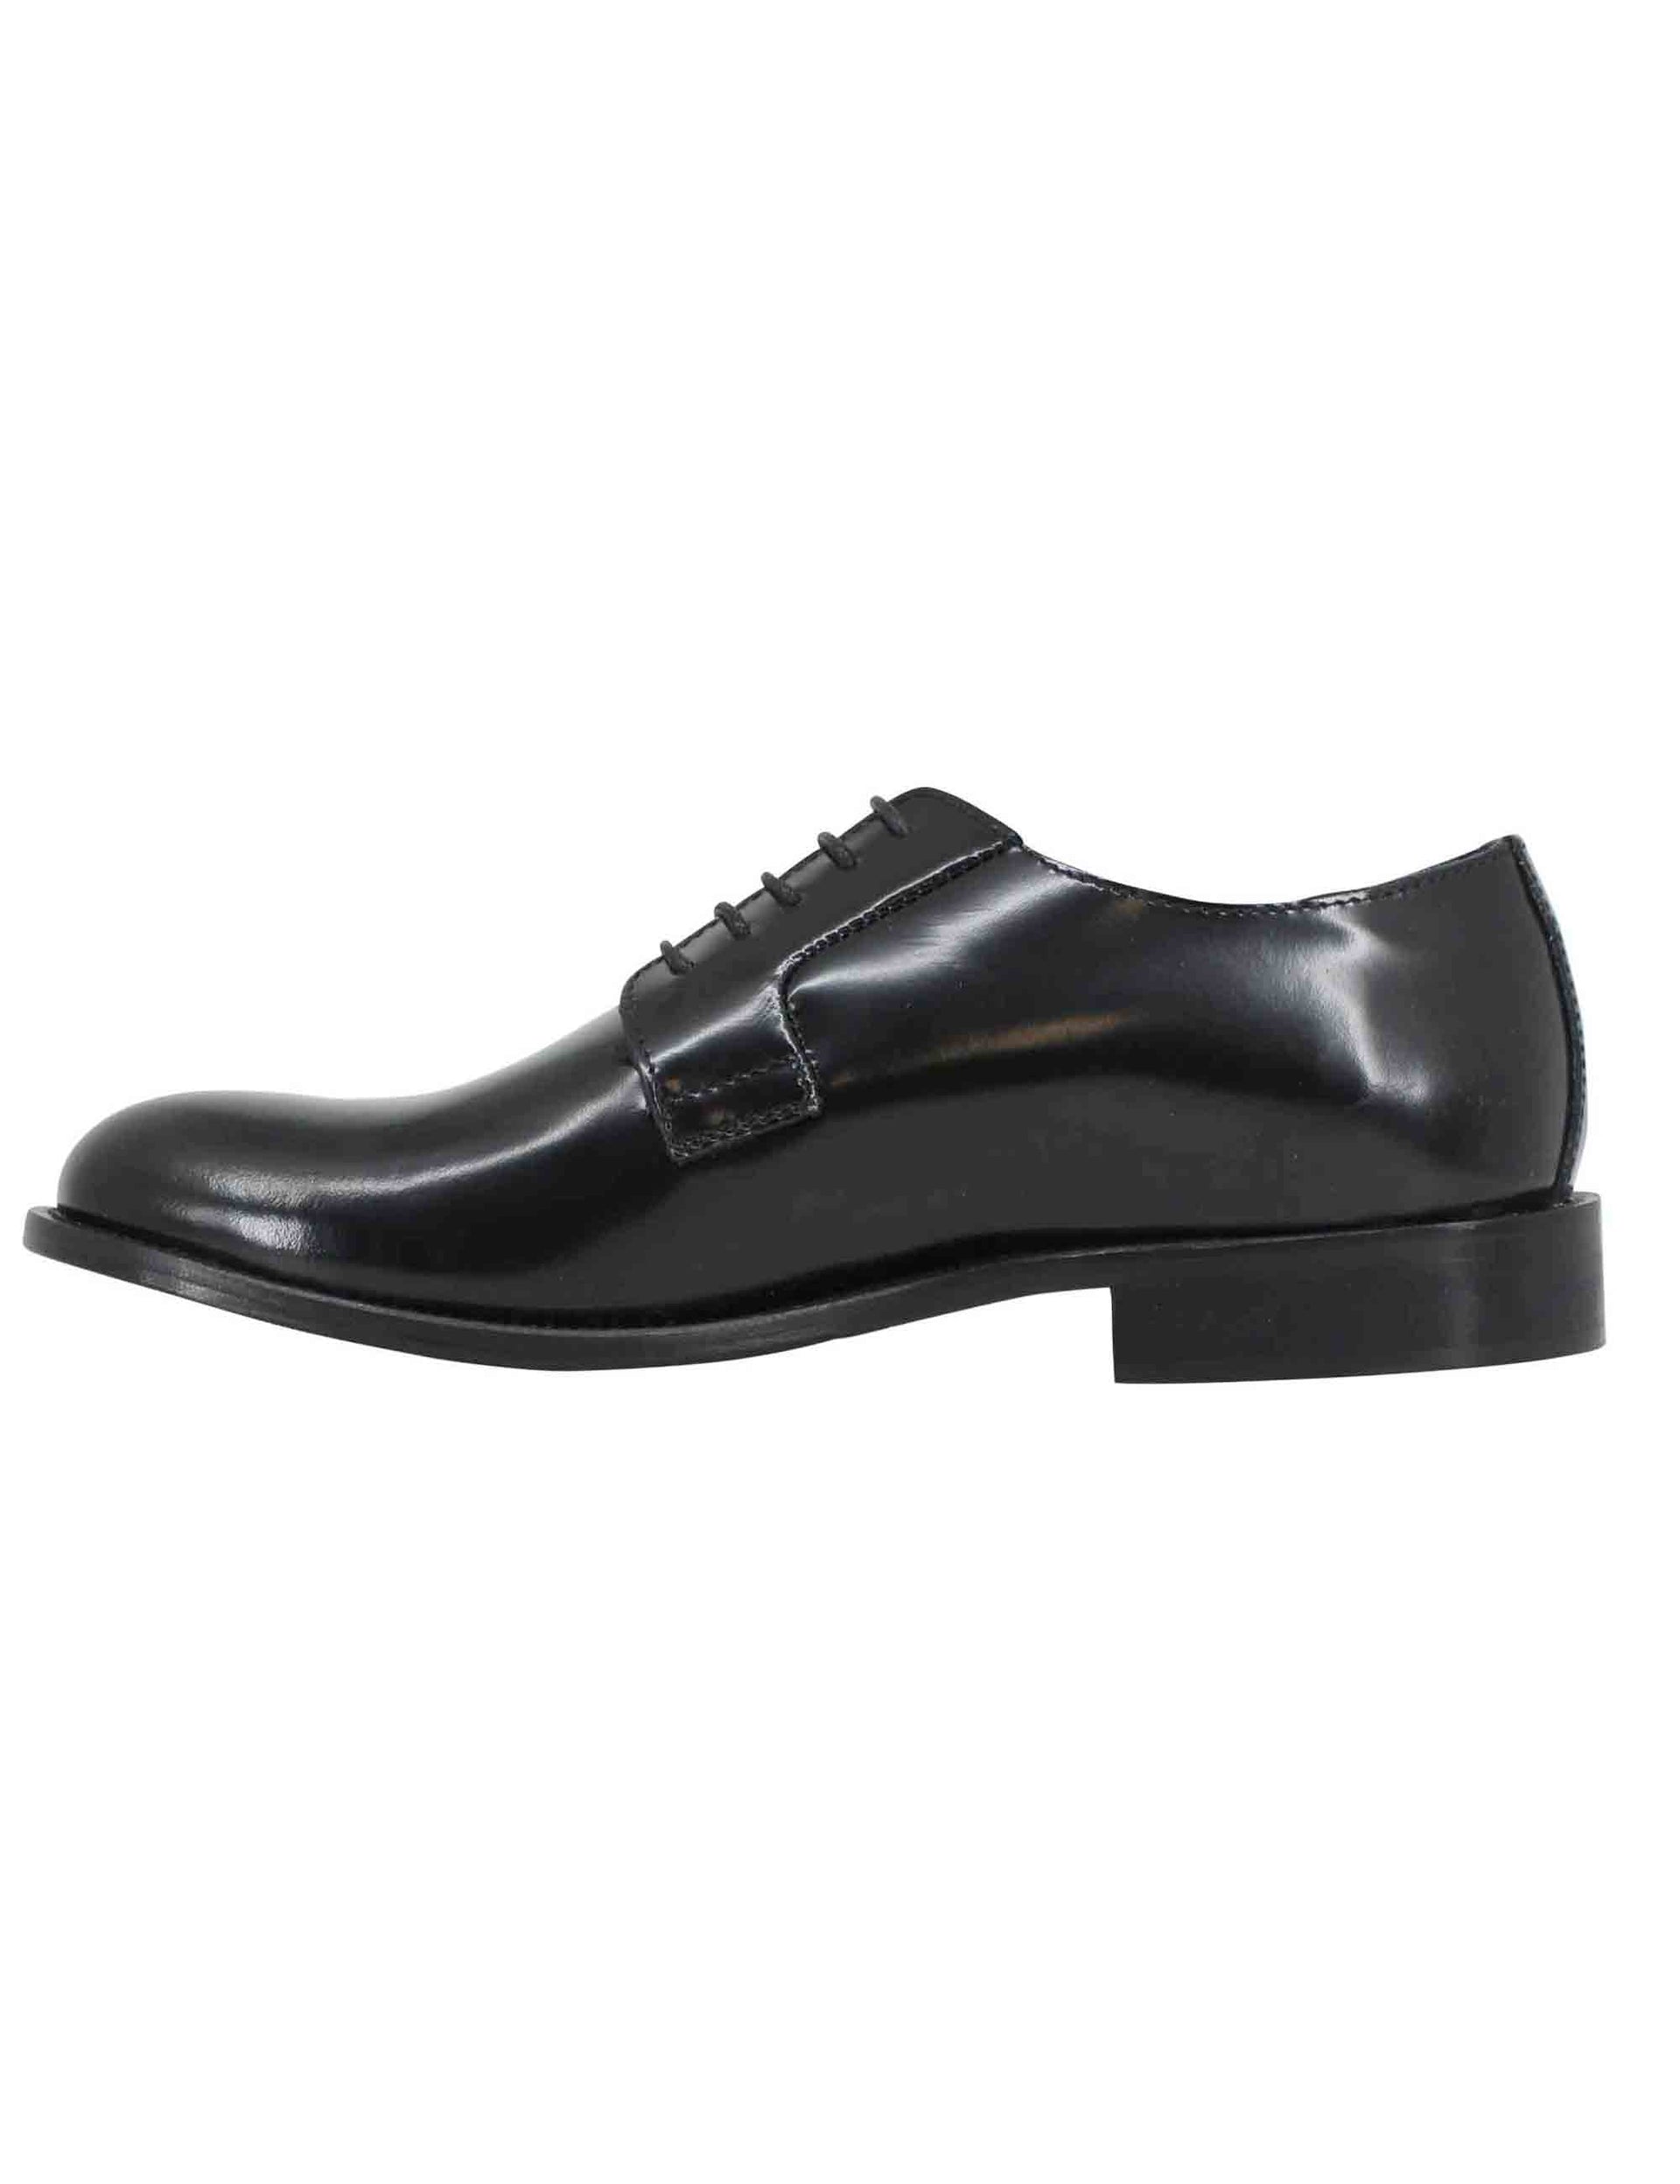 Men's black leather lace-ups with leather sole